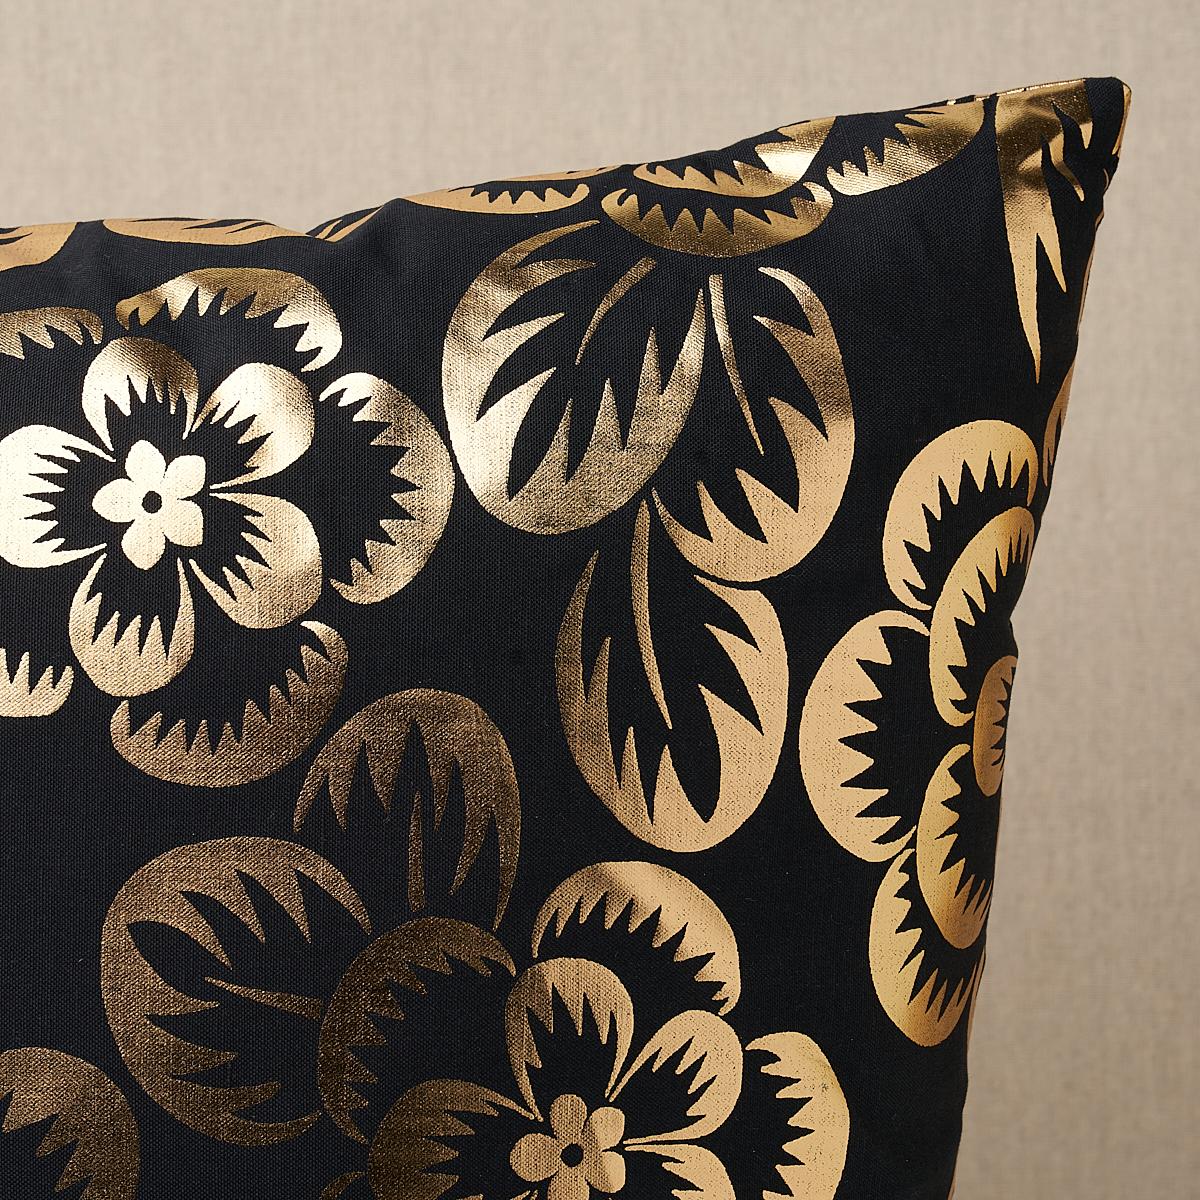 This pillow features Angelica Floral with a knife edge finish. Sophisticated and sexy, Angelica in gold-and-noir is a foil-printed floral fabric with a shimmering metallic effect. Pillow includes a feather/down fill insert and hidden zipper closure.
